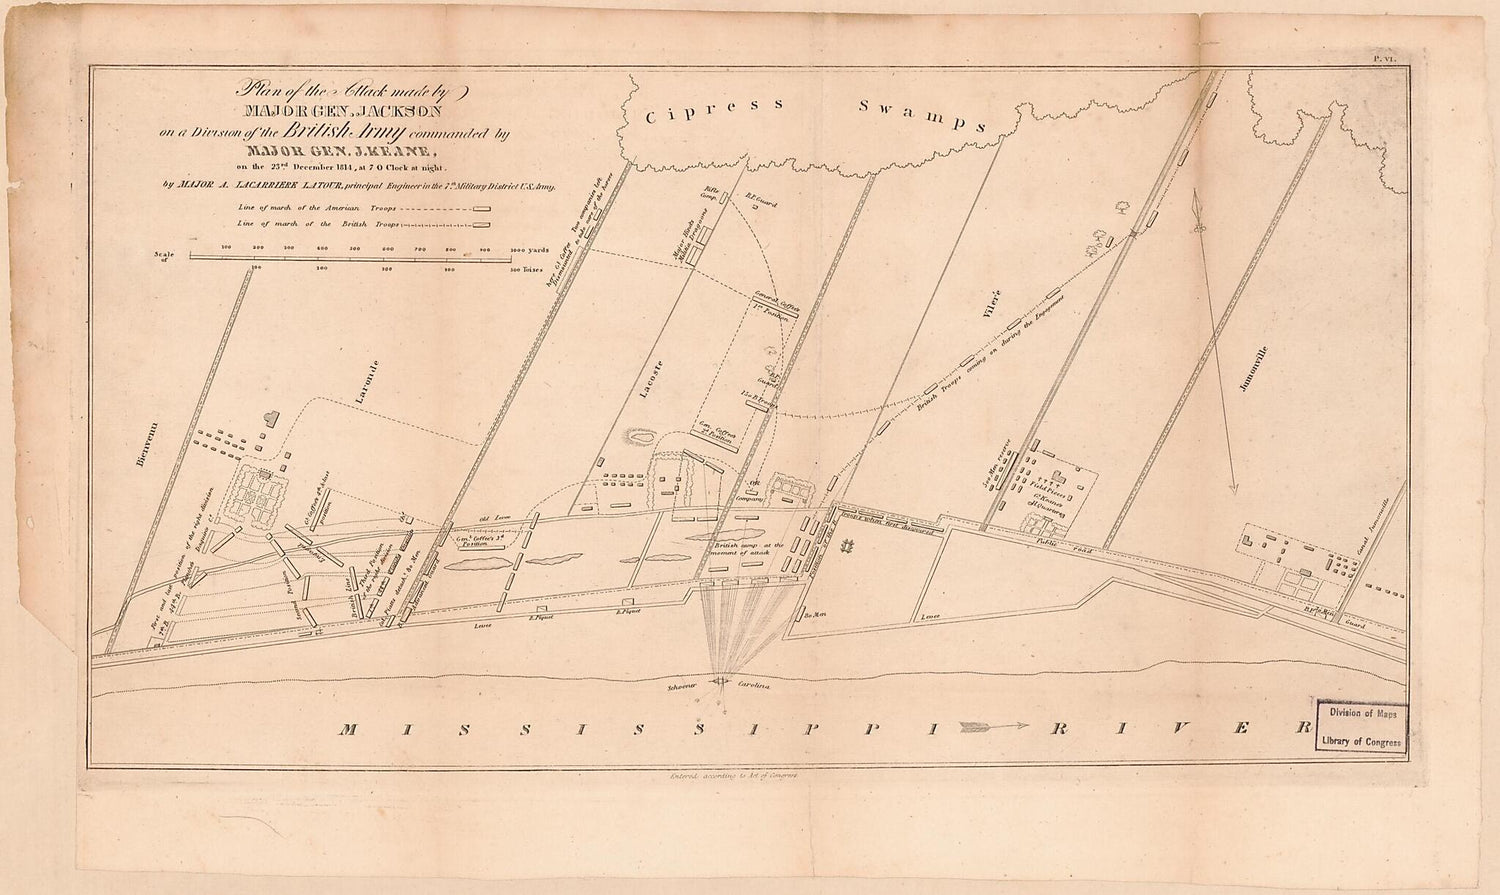 This old map of Plan of the Attack Made by Major Gen. Jackson On a Division of the British Army Commanded by Major Gen J. Keane On the 23rd December from 1814 at 7 O&